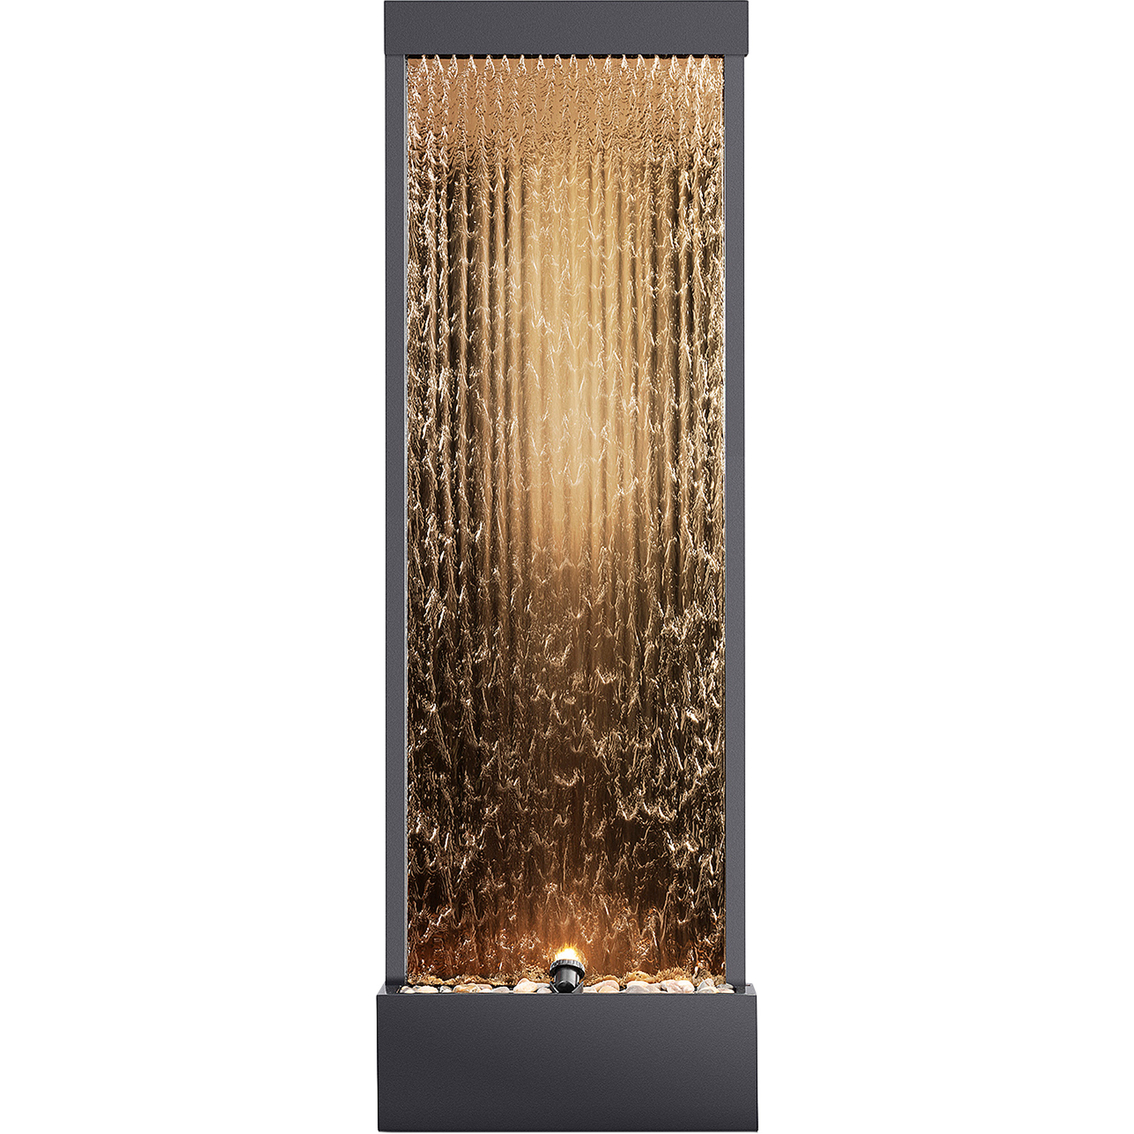 Alpine Bronze Mirror Waterfall Fountain with Stones and Light - Image 3 of 10